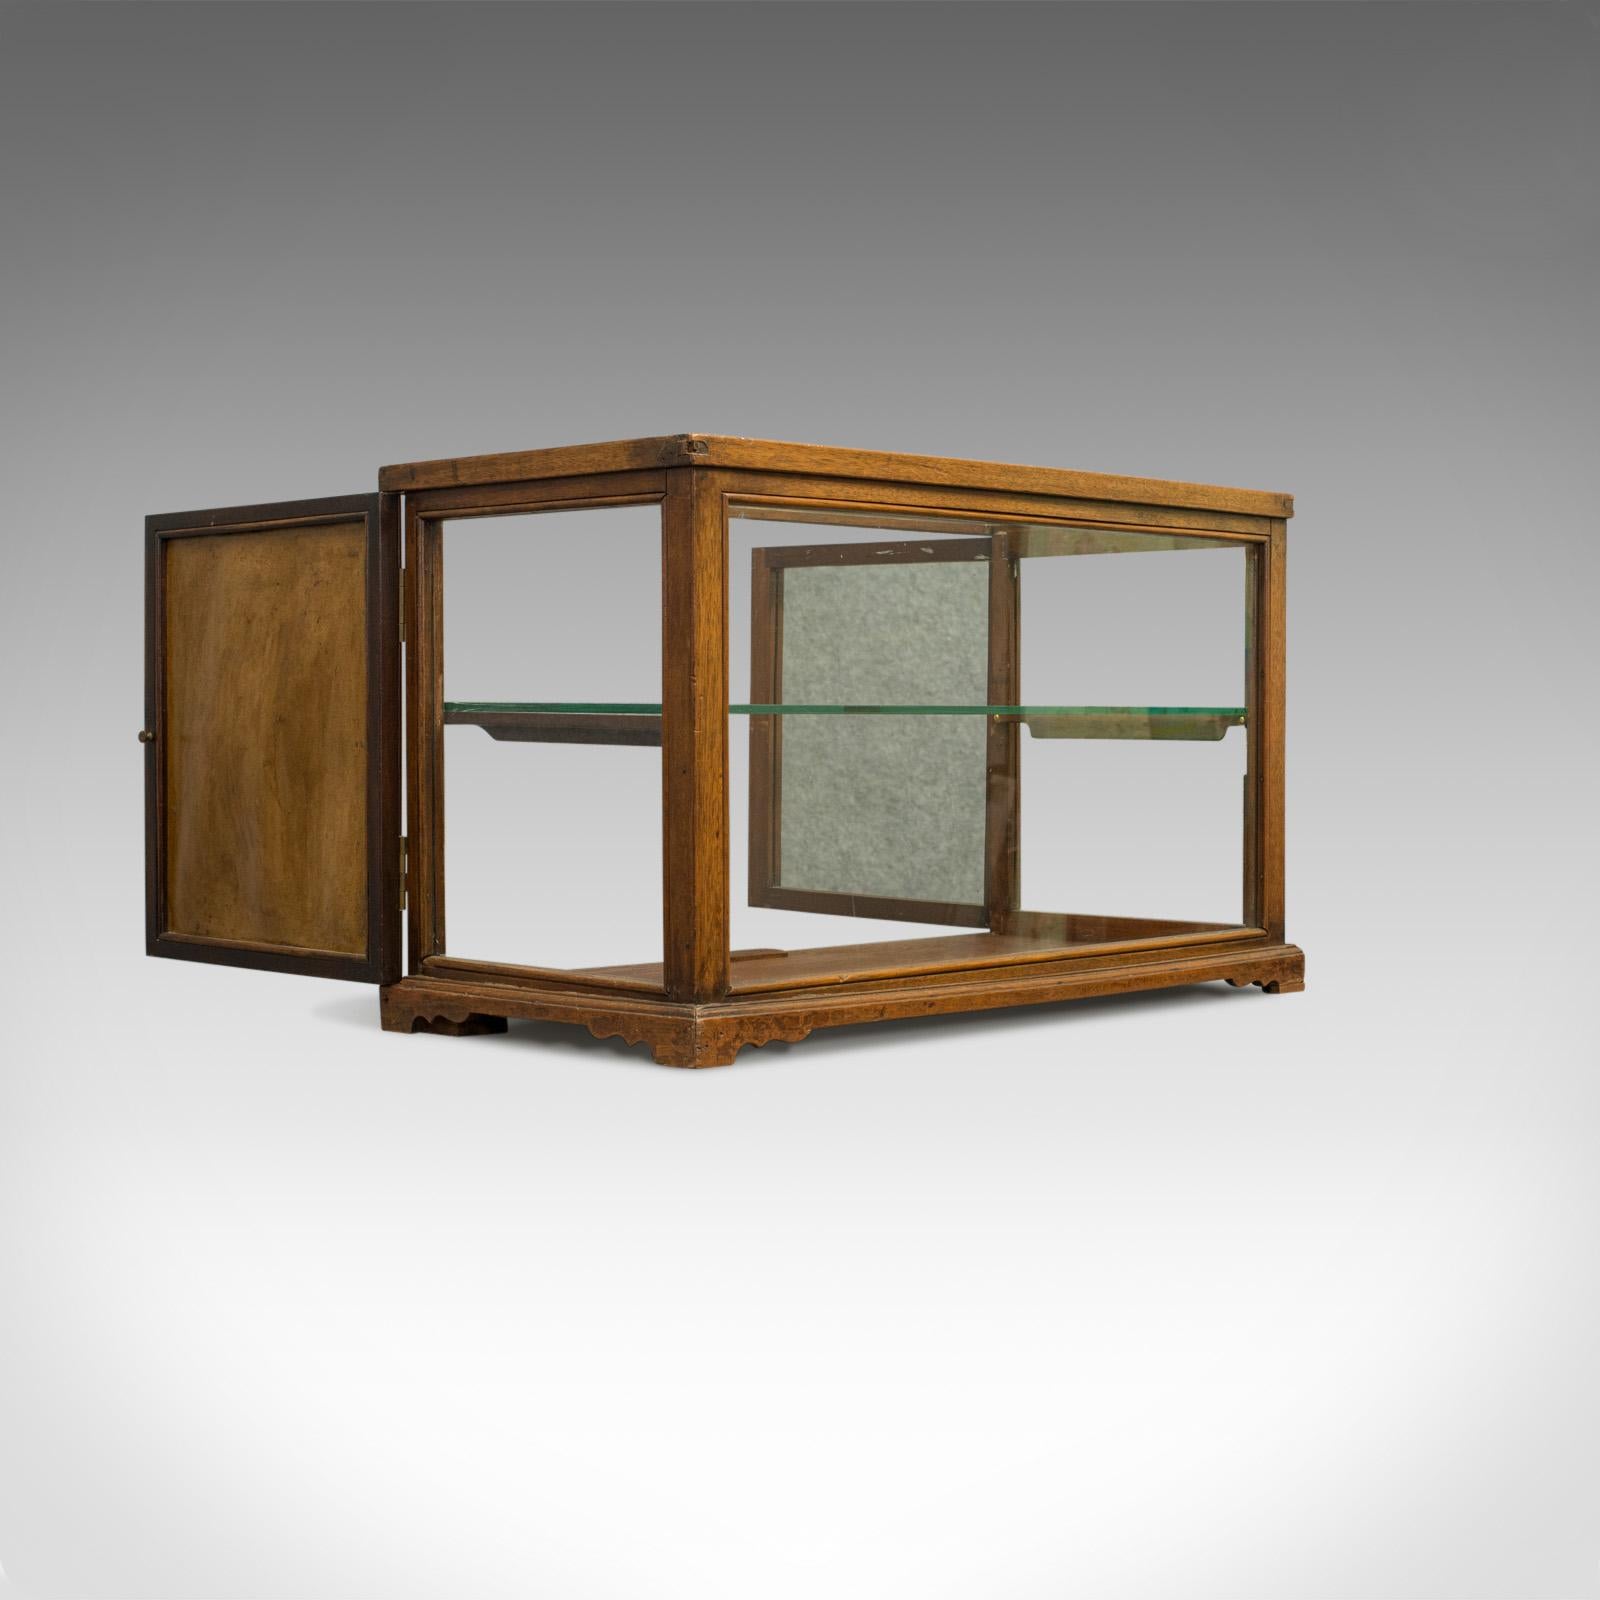 This is an antique display cabinet or shop fitting with a central glass shelf and mirror back. An English, Victorian oak cabinet from the late 19th century, circa 1900.

Crafted from oak and showing fine grain interest
Displays a desirable aged